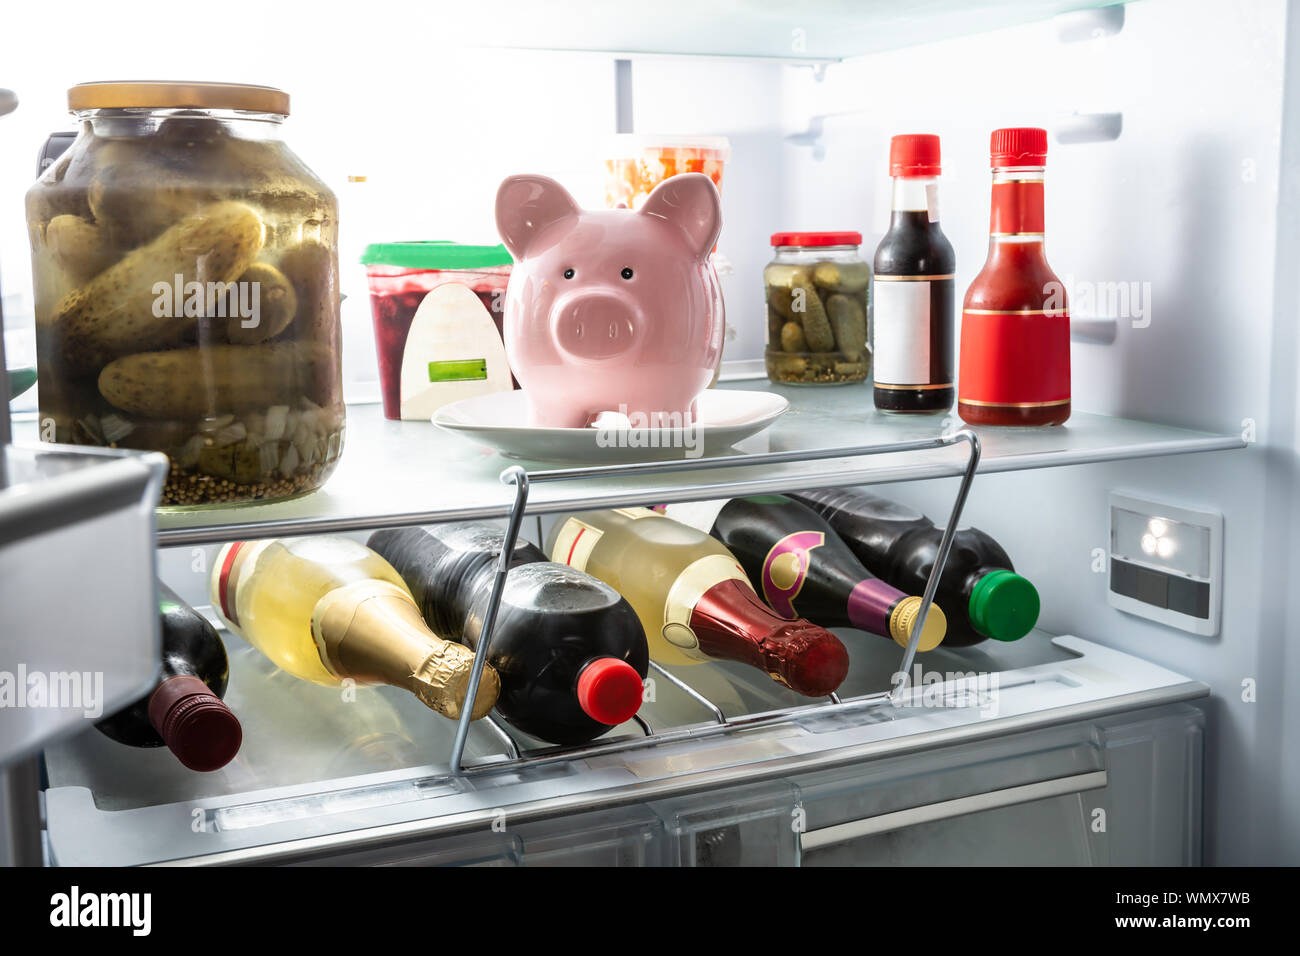 Pink Piggy Bank On White Plate Inside Refrigerator With Sauces And Preserved Food Stock Photo